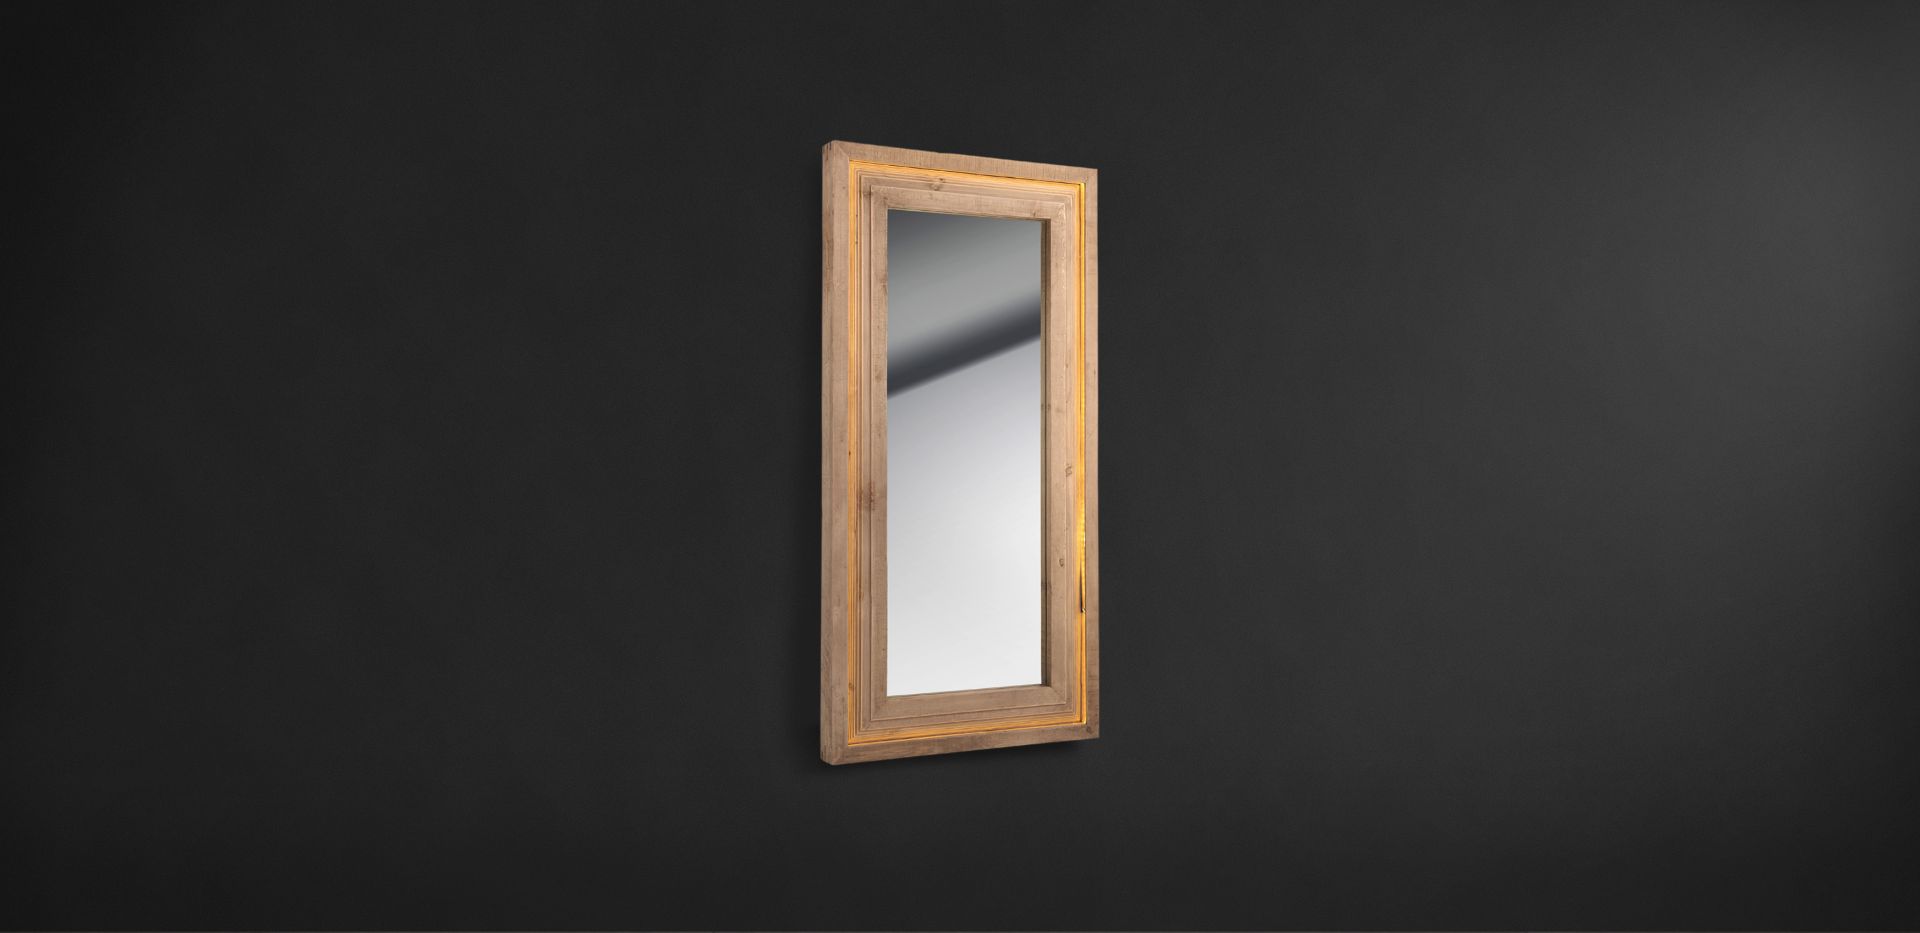 Moulding Mirror Handcrafted In Genuine English Reclaimed Timber, The Rectangular Moulding Mirror Has - Image 2 of 2